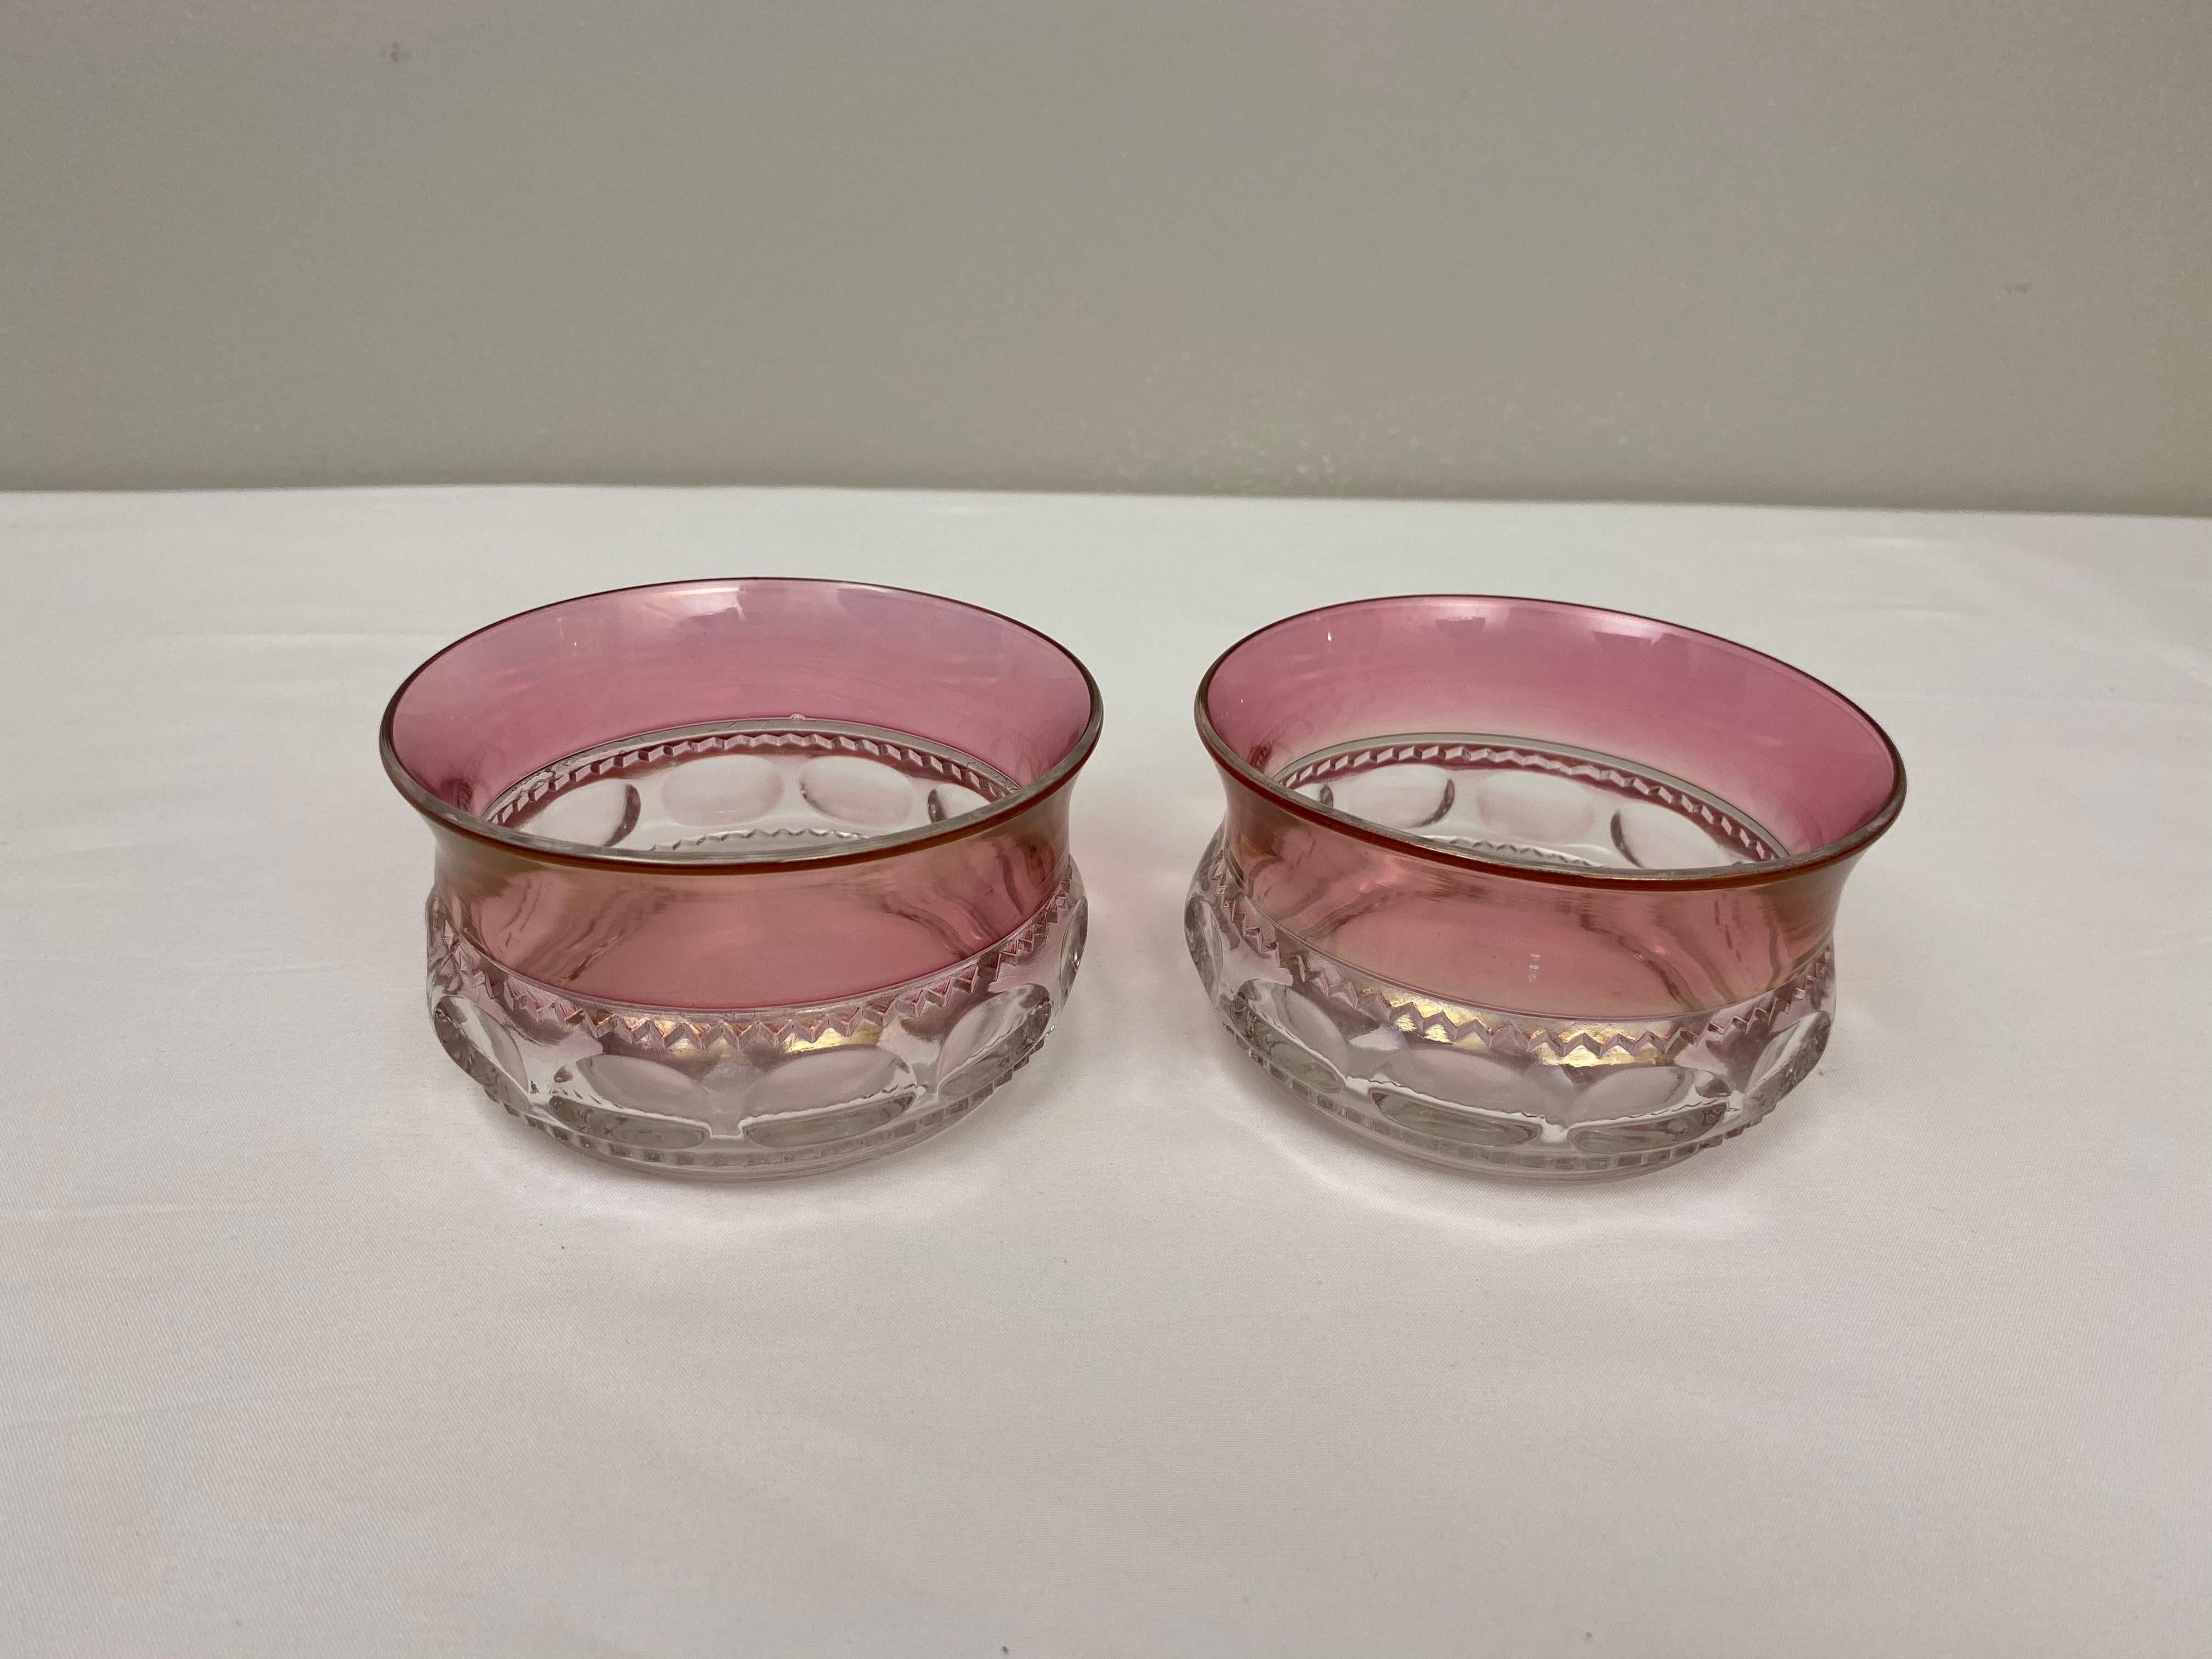 Vintage Pair Bohemian Pink & Clear Czech Glass Candy Dishes or Appetizer Bowls 1